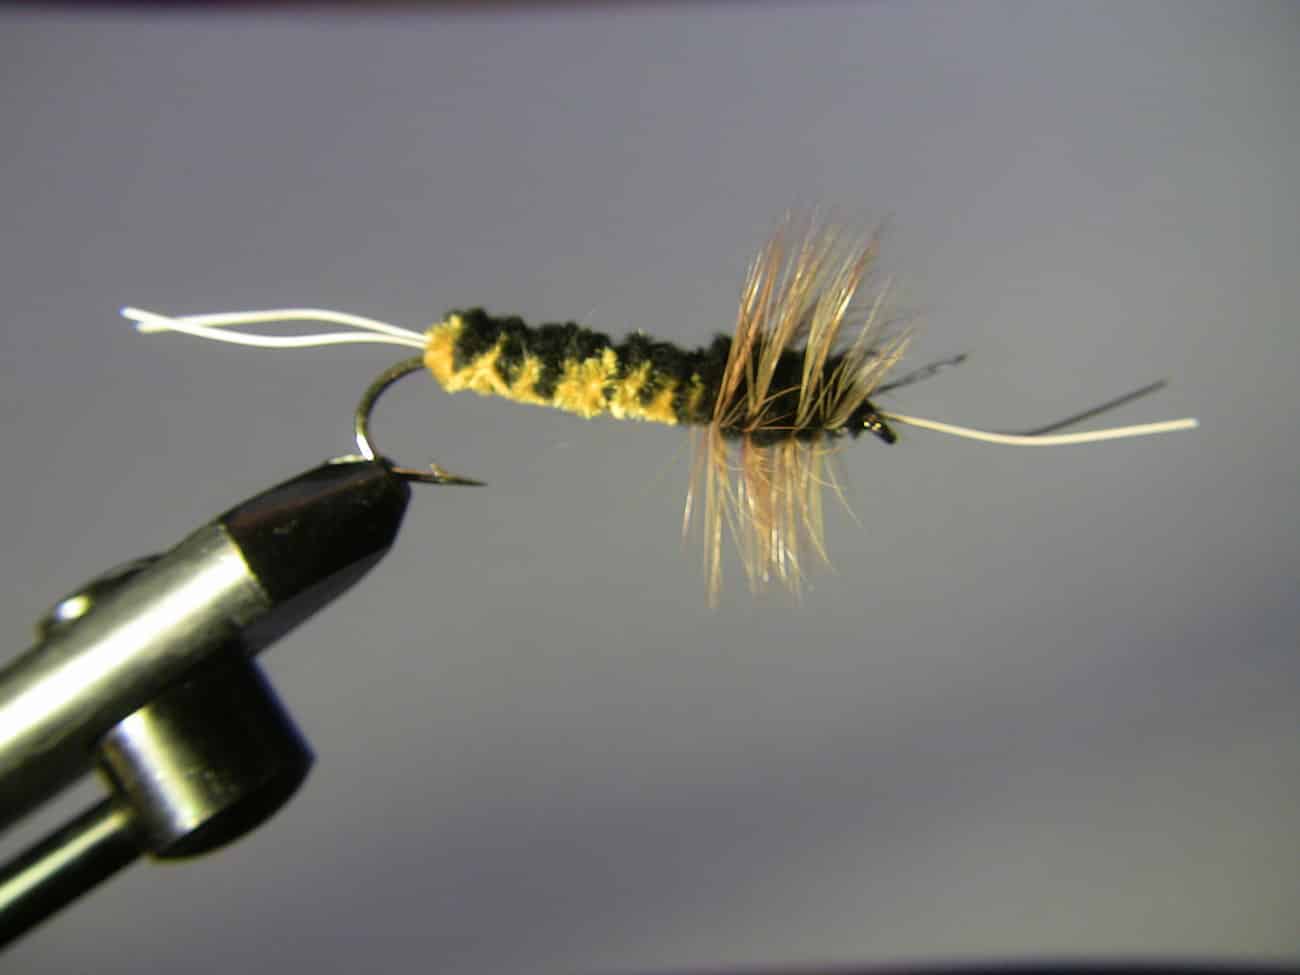 Bitch creek nymph, trout fly fishing, fly fishing setup for trout, how to fly fish for trout, fly fishing rigs for trout, how to fly fish for trout